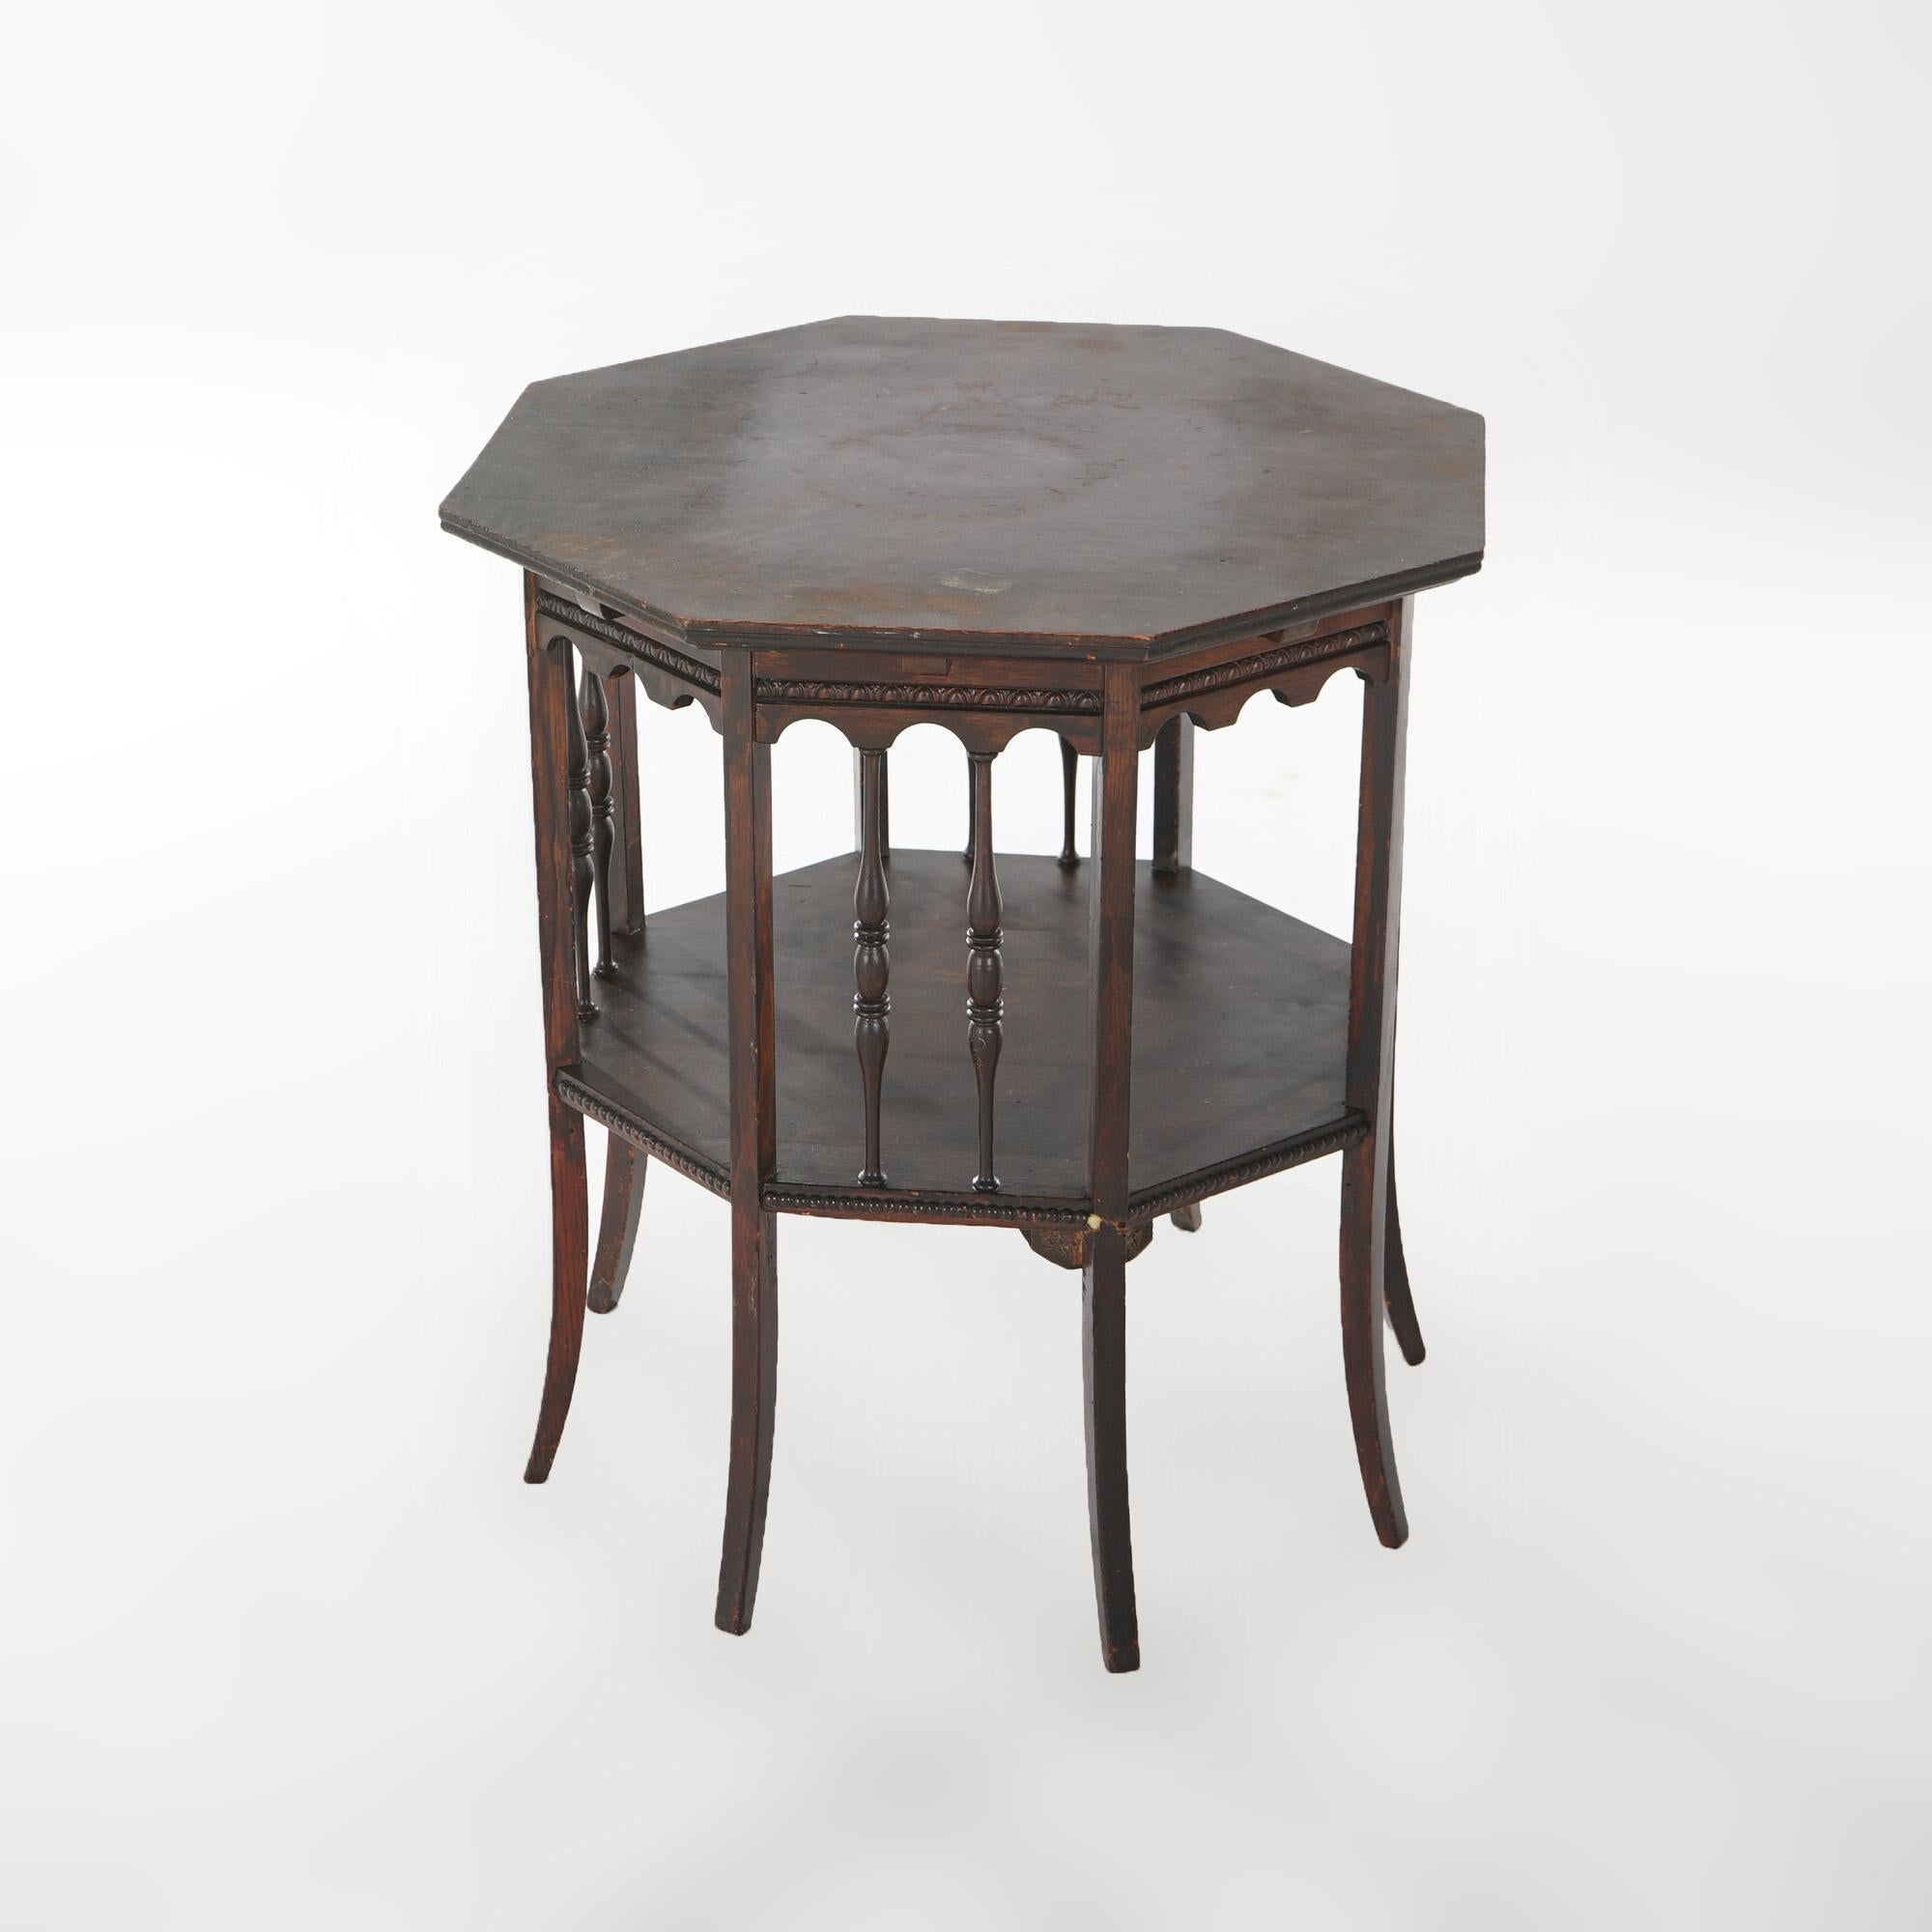 An antique Arts and Crafts side table offers oak construction with octagonal top over lower shelf with spindle supports and raised on square splayed legs, c1910

Measures - 24.25